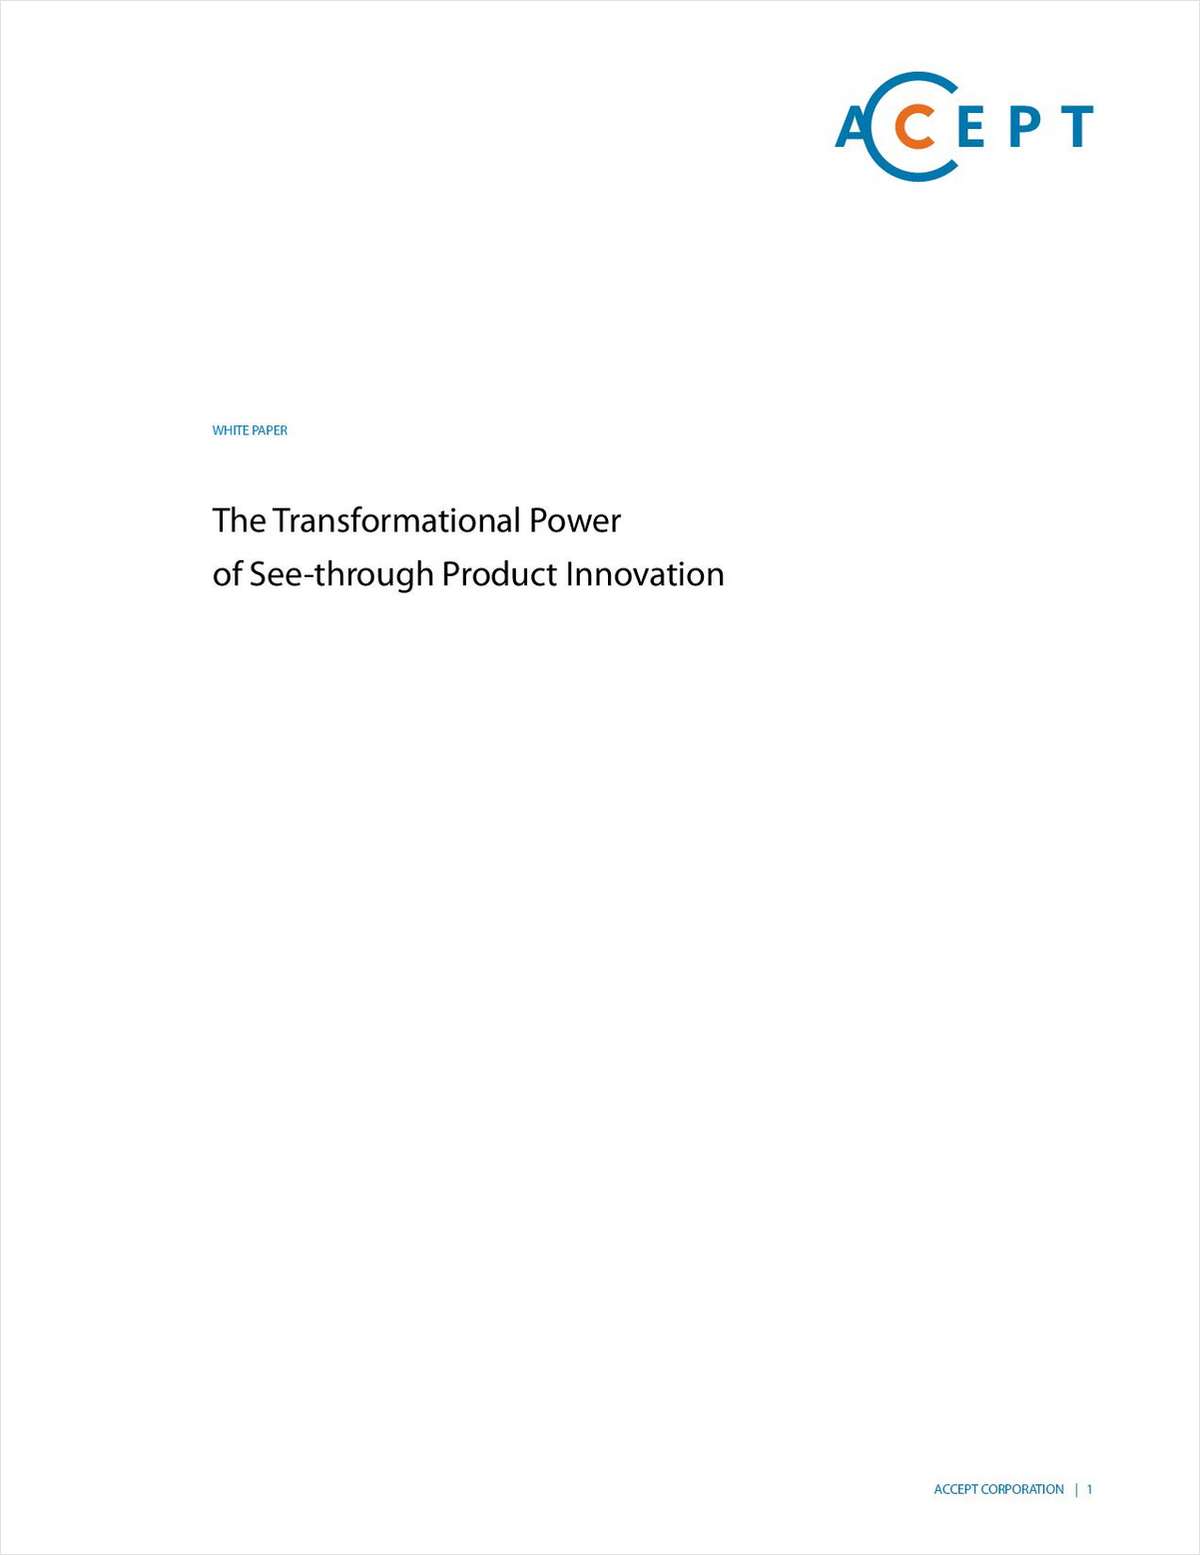 The Transformational Power of See-through Product Innovation